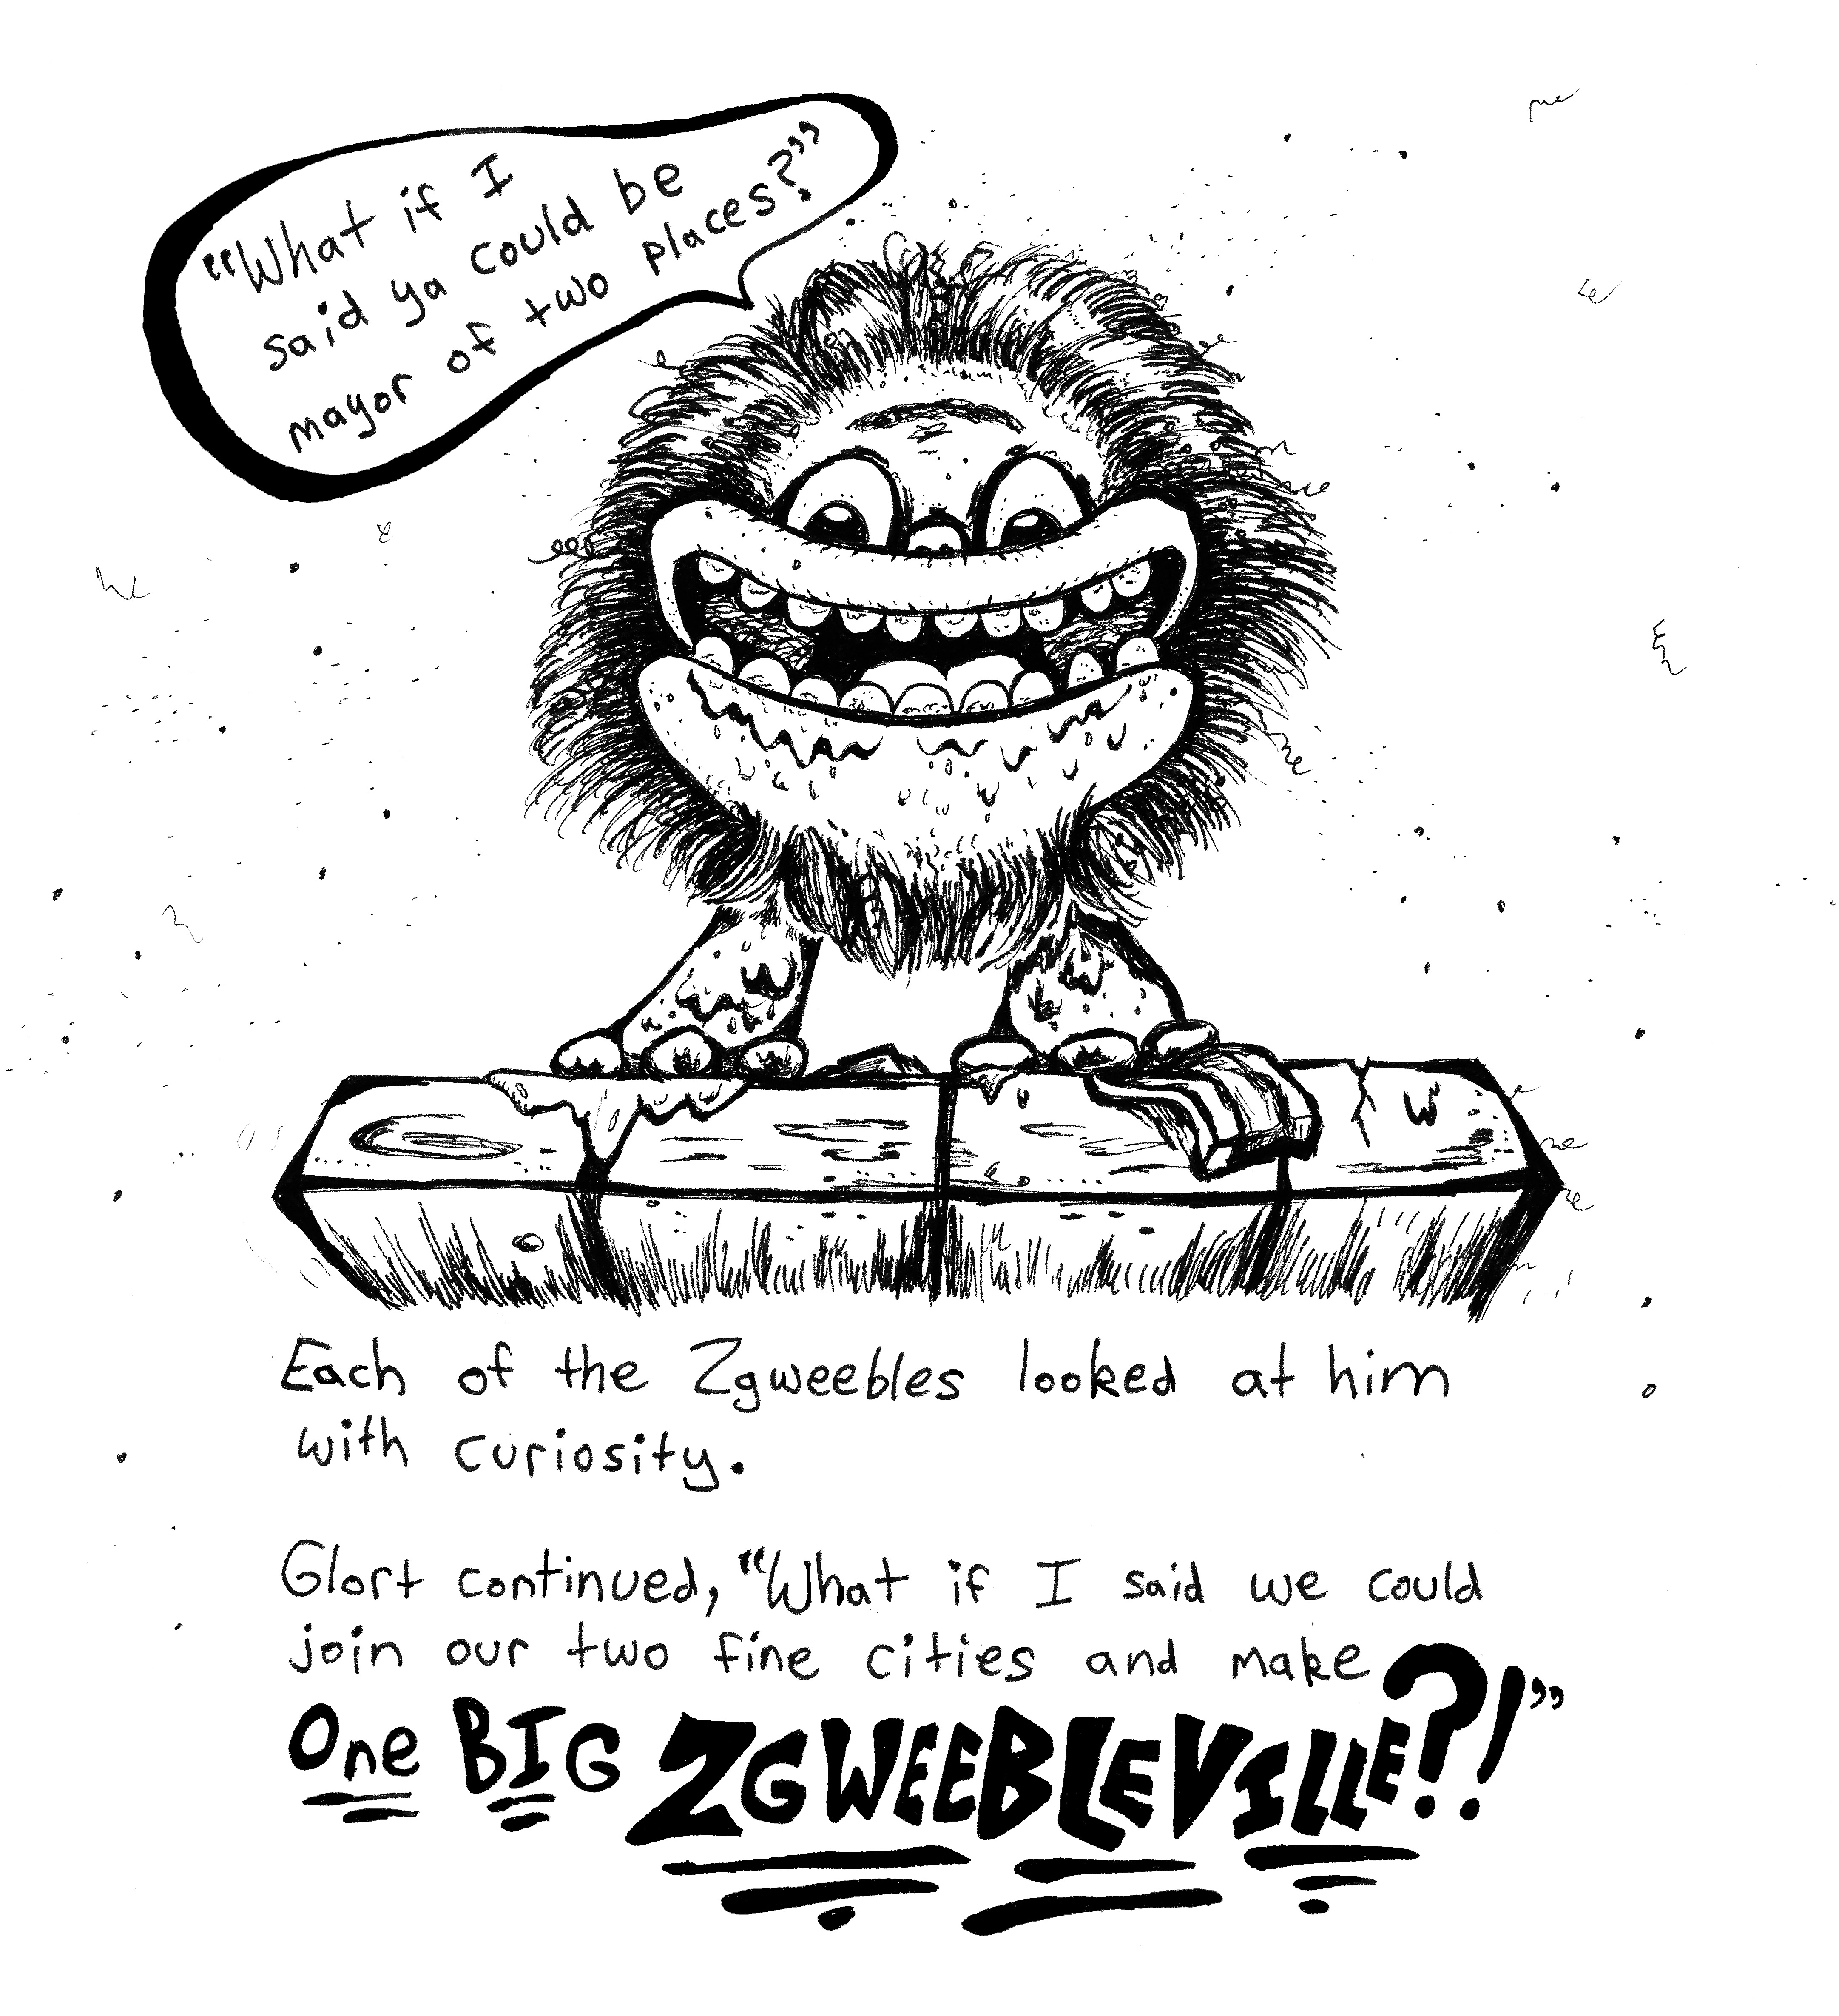 Twin Cities childrens book illustrator Josh Wallace, "Zgweebleville" Story by Josh Wallace and Jena Wallace, illustrations by Josh Wallace, ink on paper - Glort standing on a table